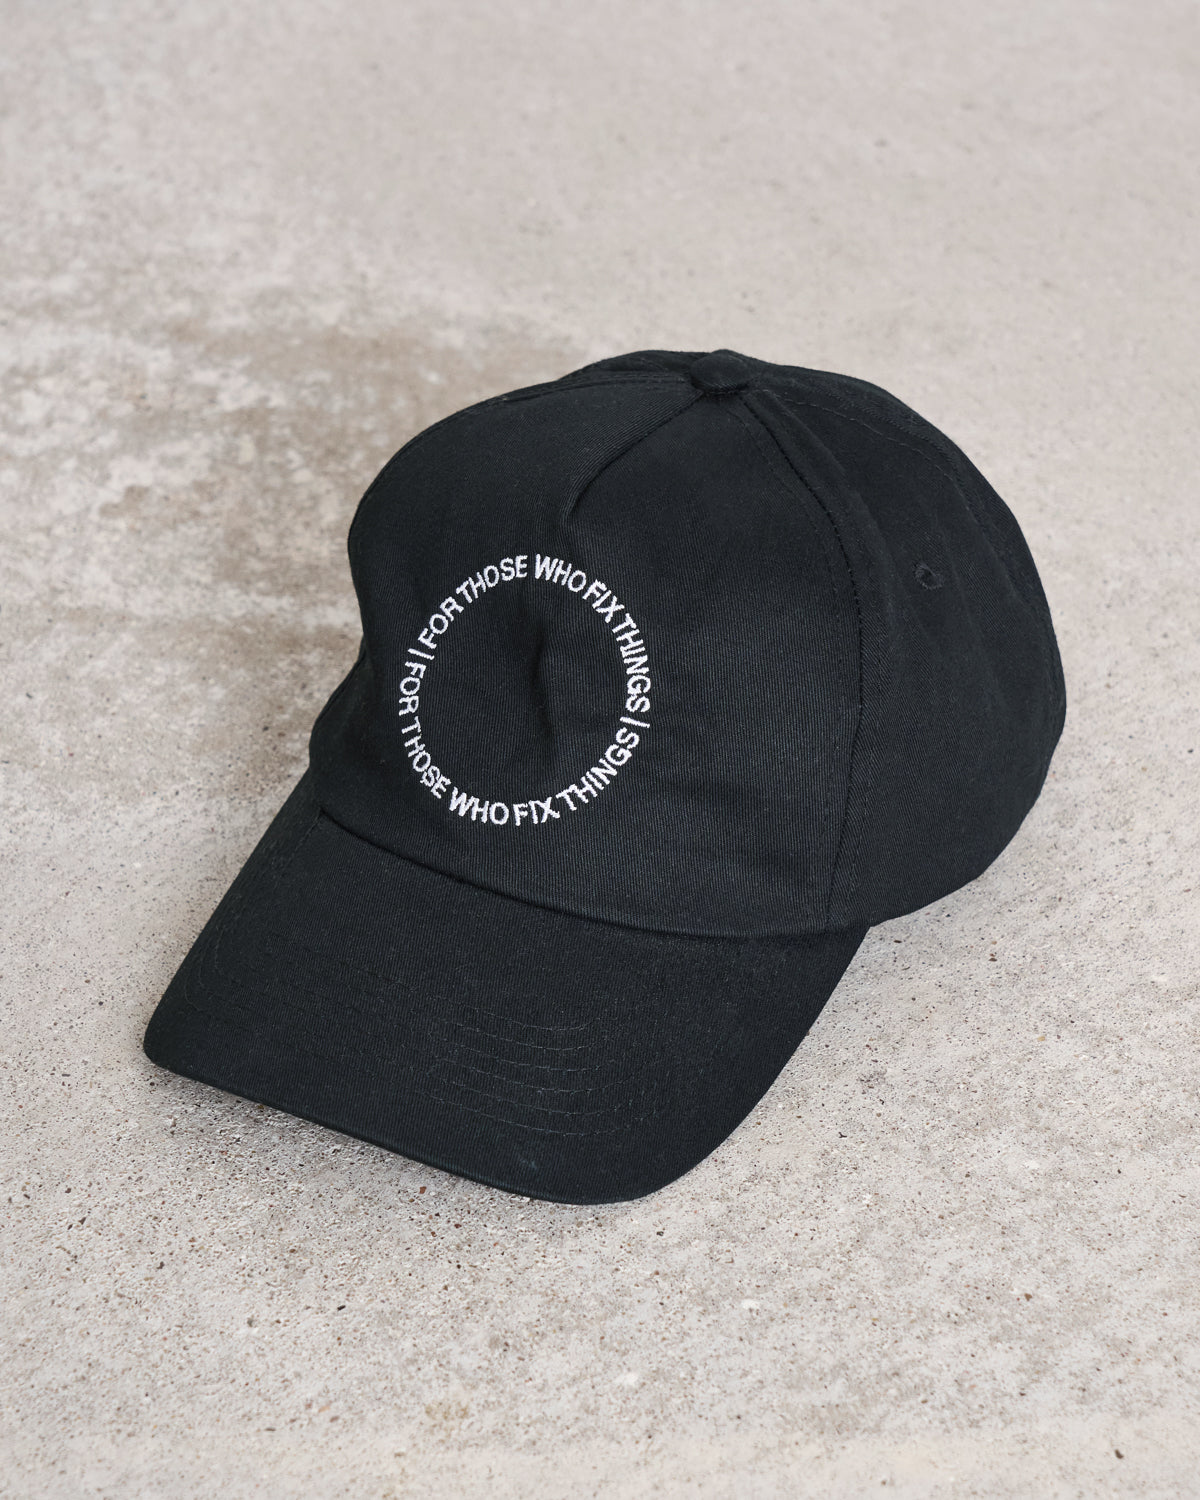 CAP FOR THOSE WHO FIX THINGS BLACK GOTS FOR MEN